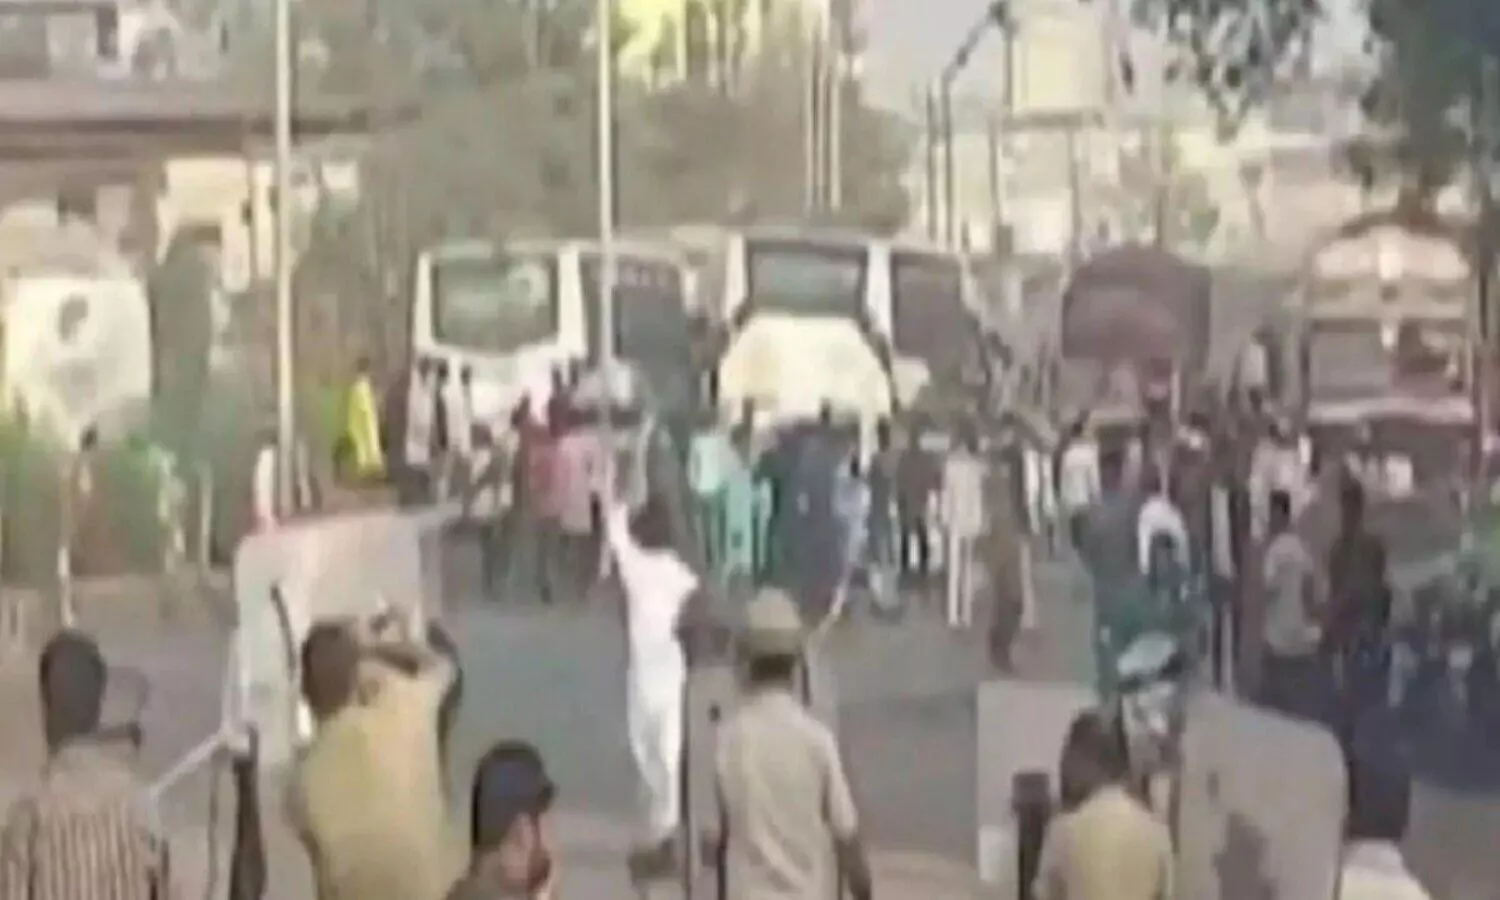 Stone pelting in two communities